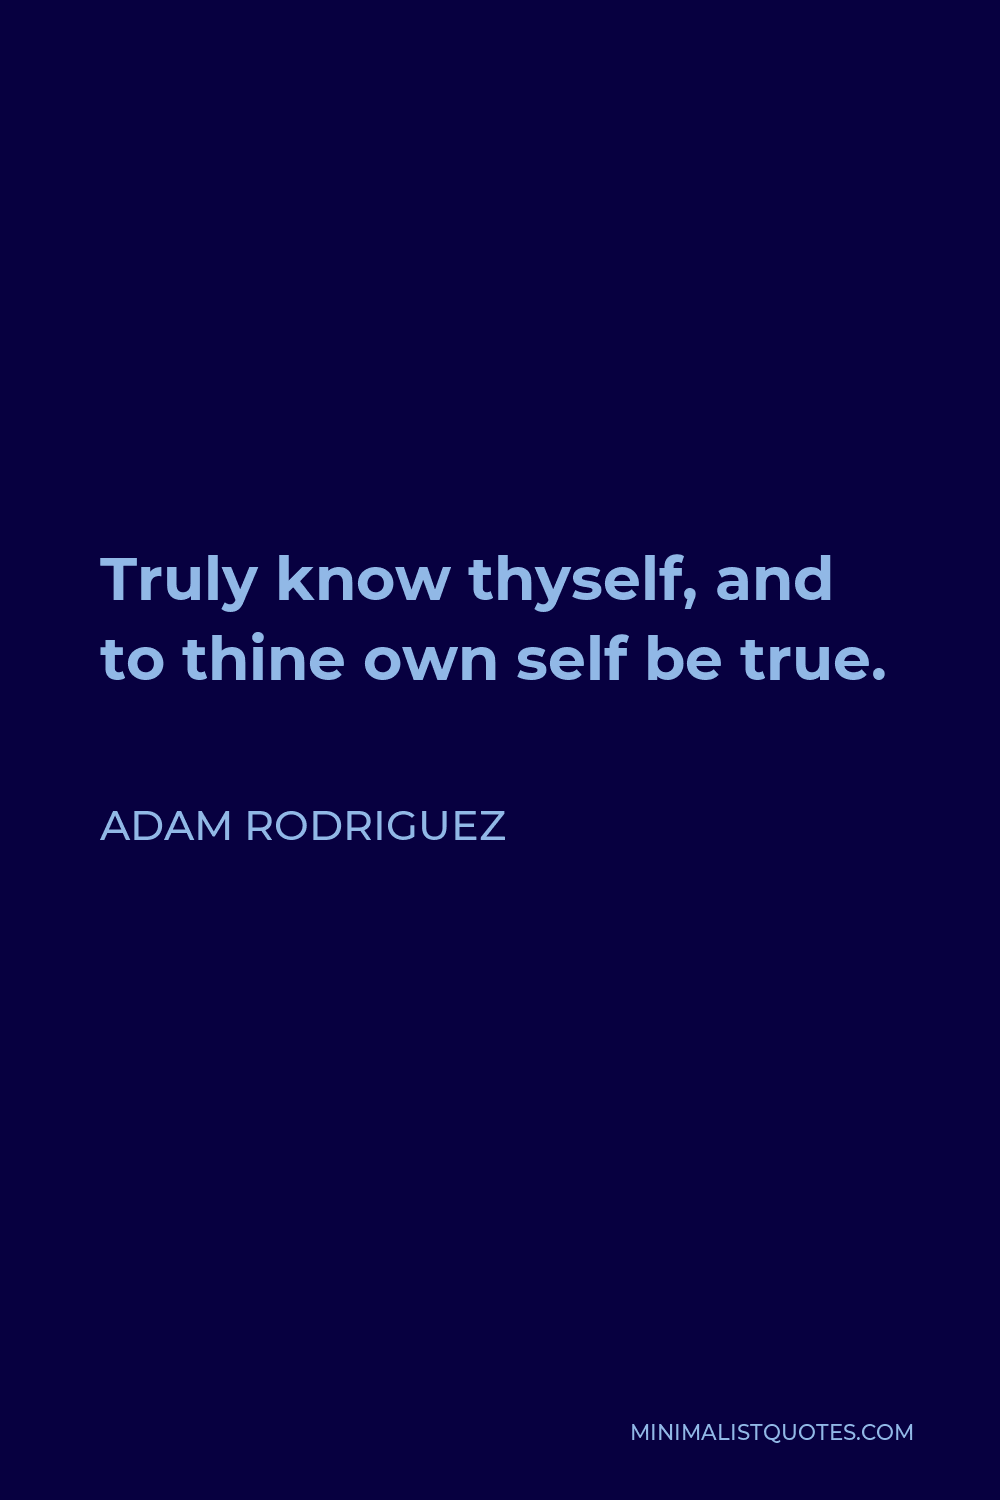 Adam Rodriguez Quote - Truly know thyself, and to thine own self be true.